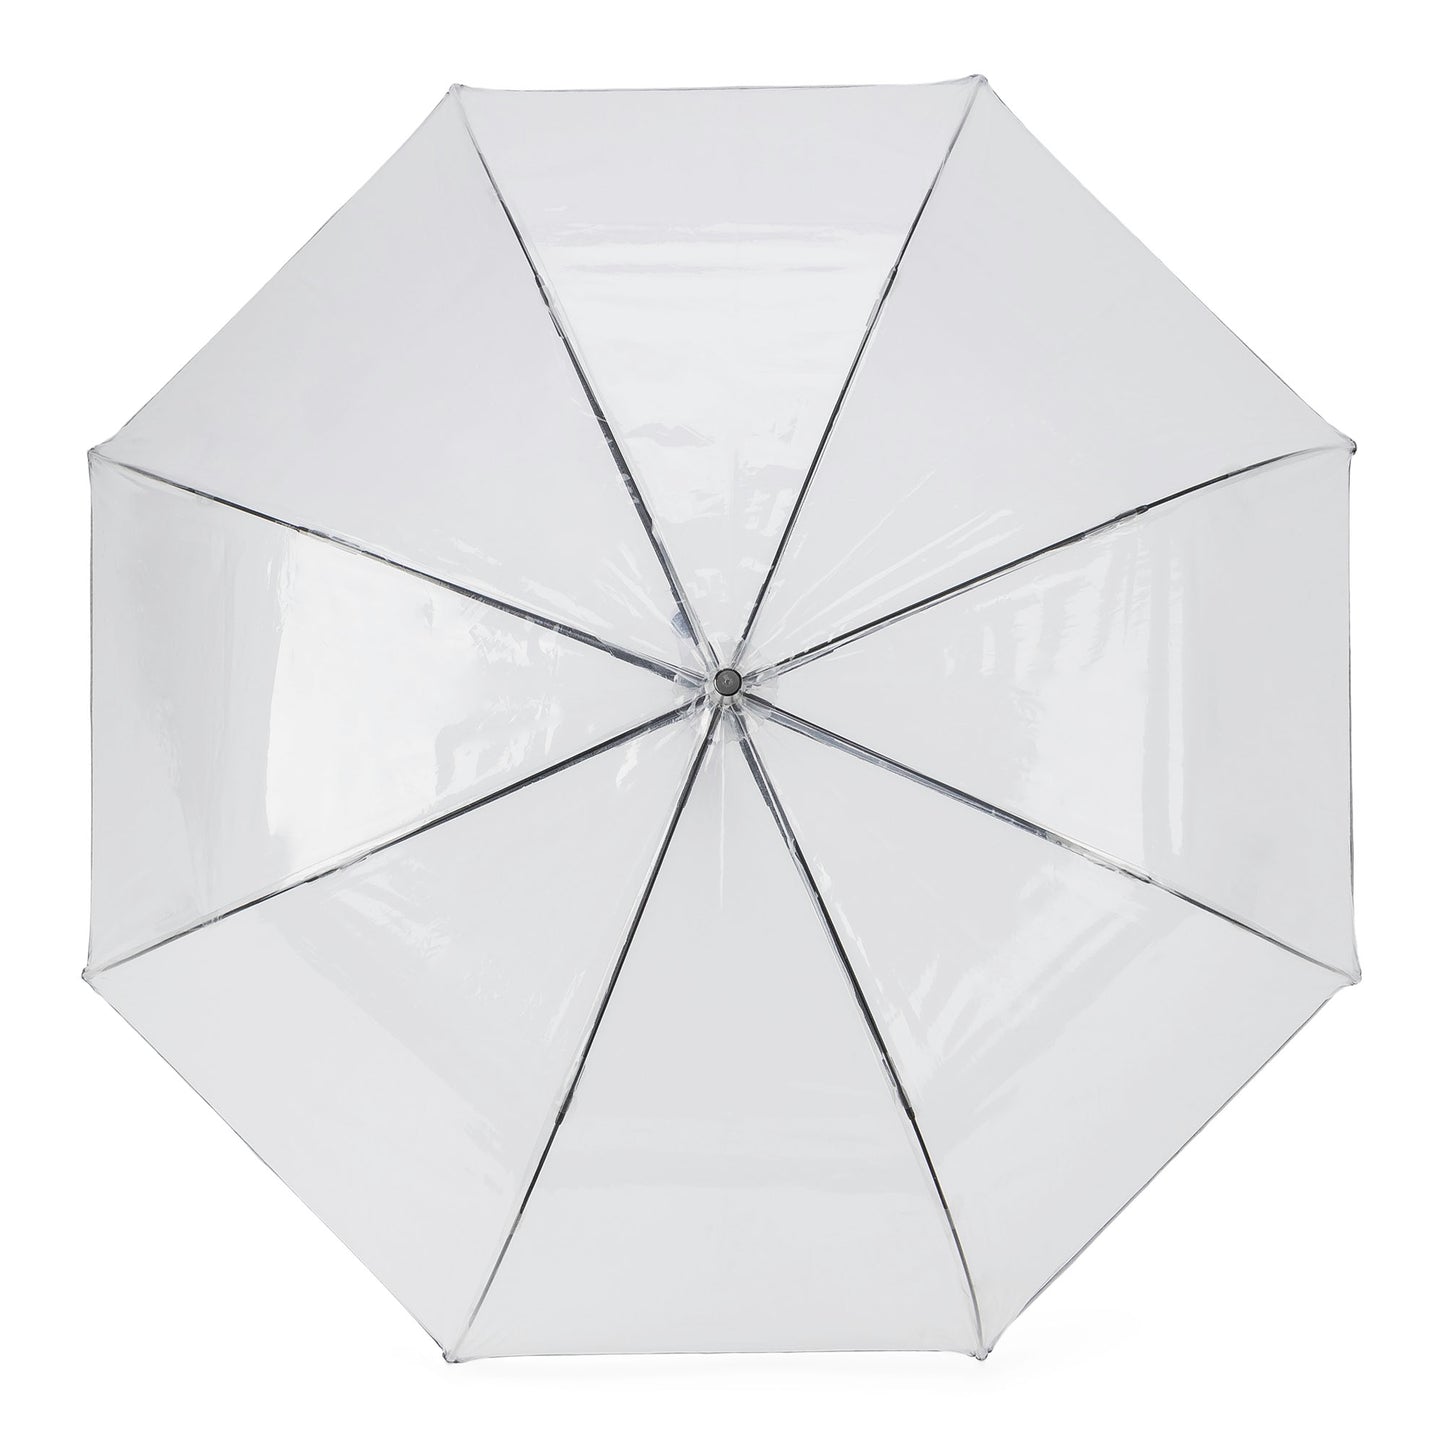 Auto Open 52" Arc Bubble Umbrella with Clear Crook Handle